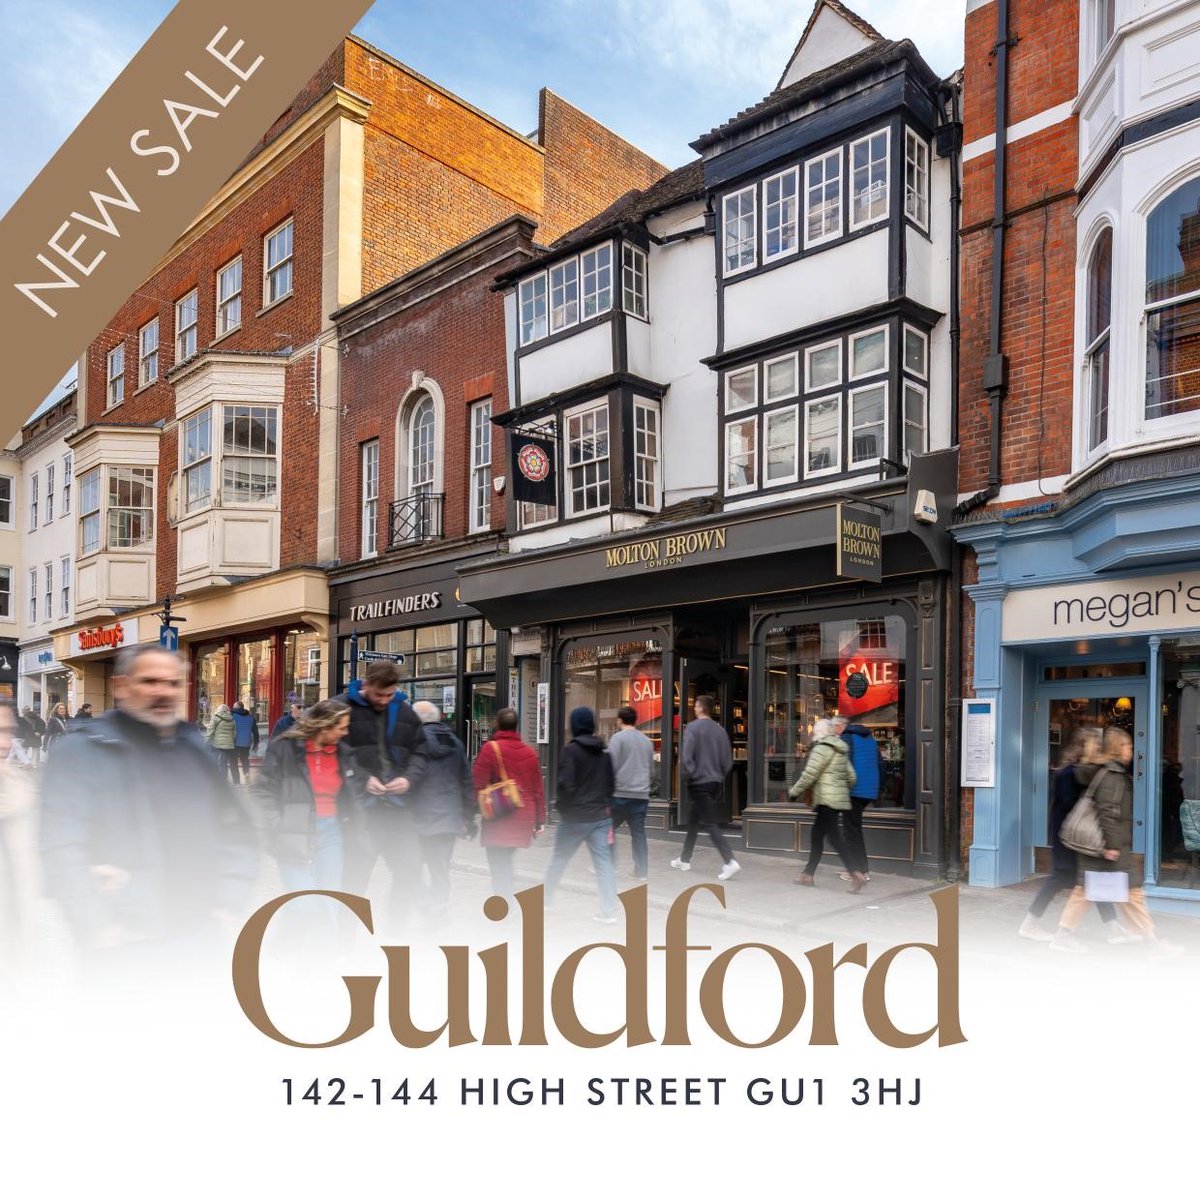 Clifton Agency are launching the #sale of this prime retail & leisure investment in #Guildford on behalf of @ThackerayGroup. 
 
For further information, please get in touch with the team or our joint agents at @Colliers_UK.

#Retail #Leisure #Investment #Property #RealEstate